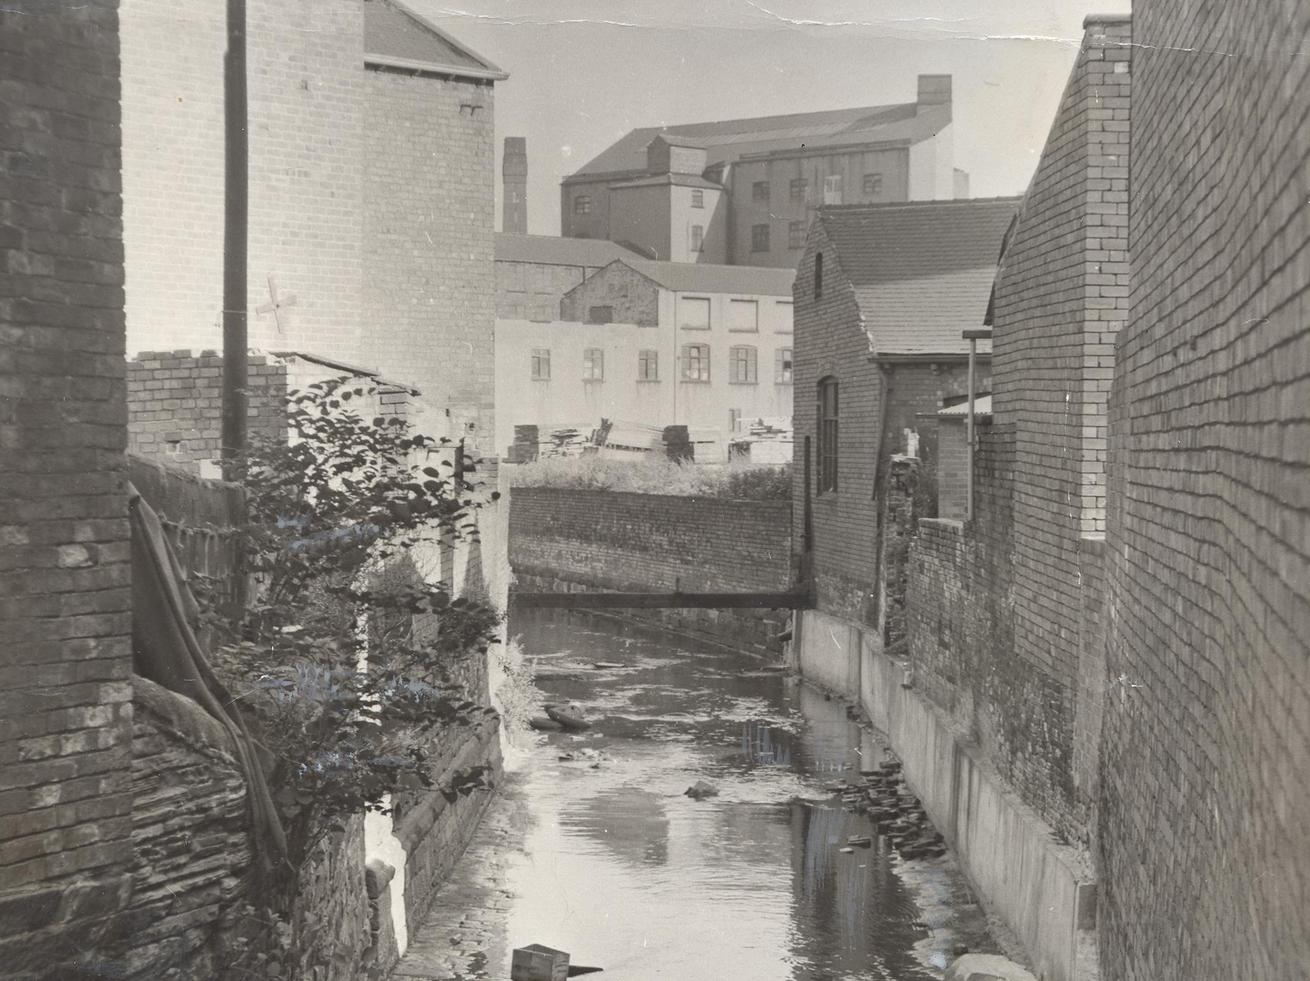 Hol Beck, from which the Holbeck district derives its name, pictured from a bridge in Domestic Street.